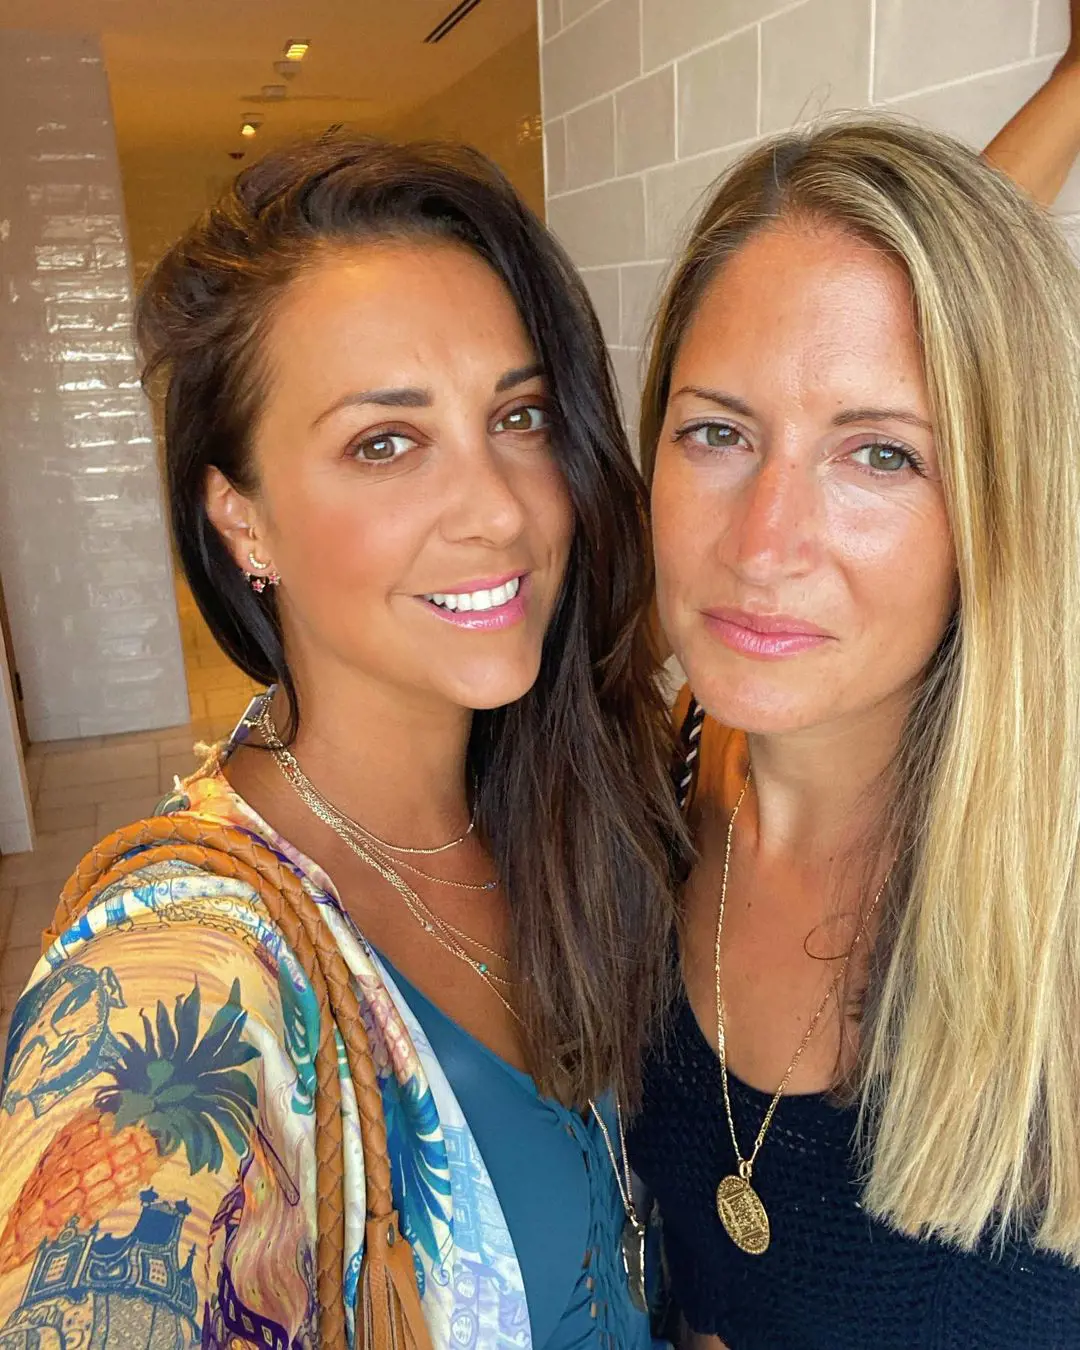 Jenna Schillaci and Maxine Hardcastle pictured together at Bodrum Mugla in Turkey in 2021